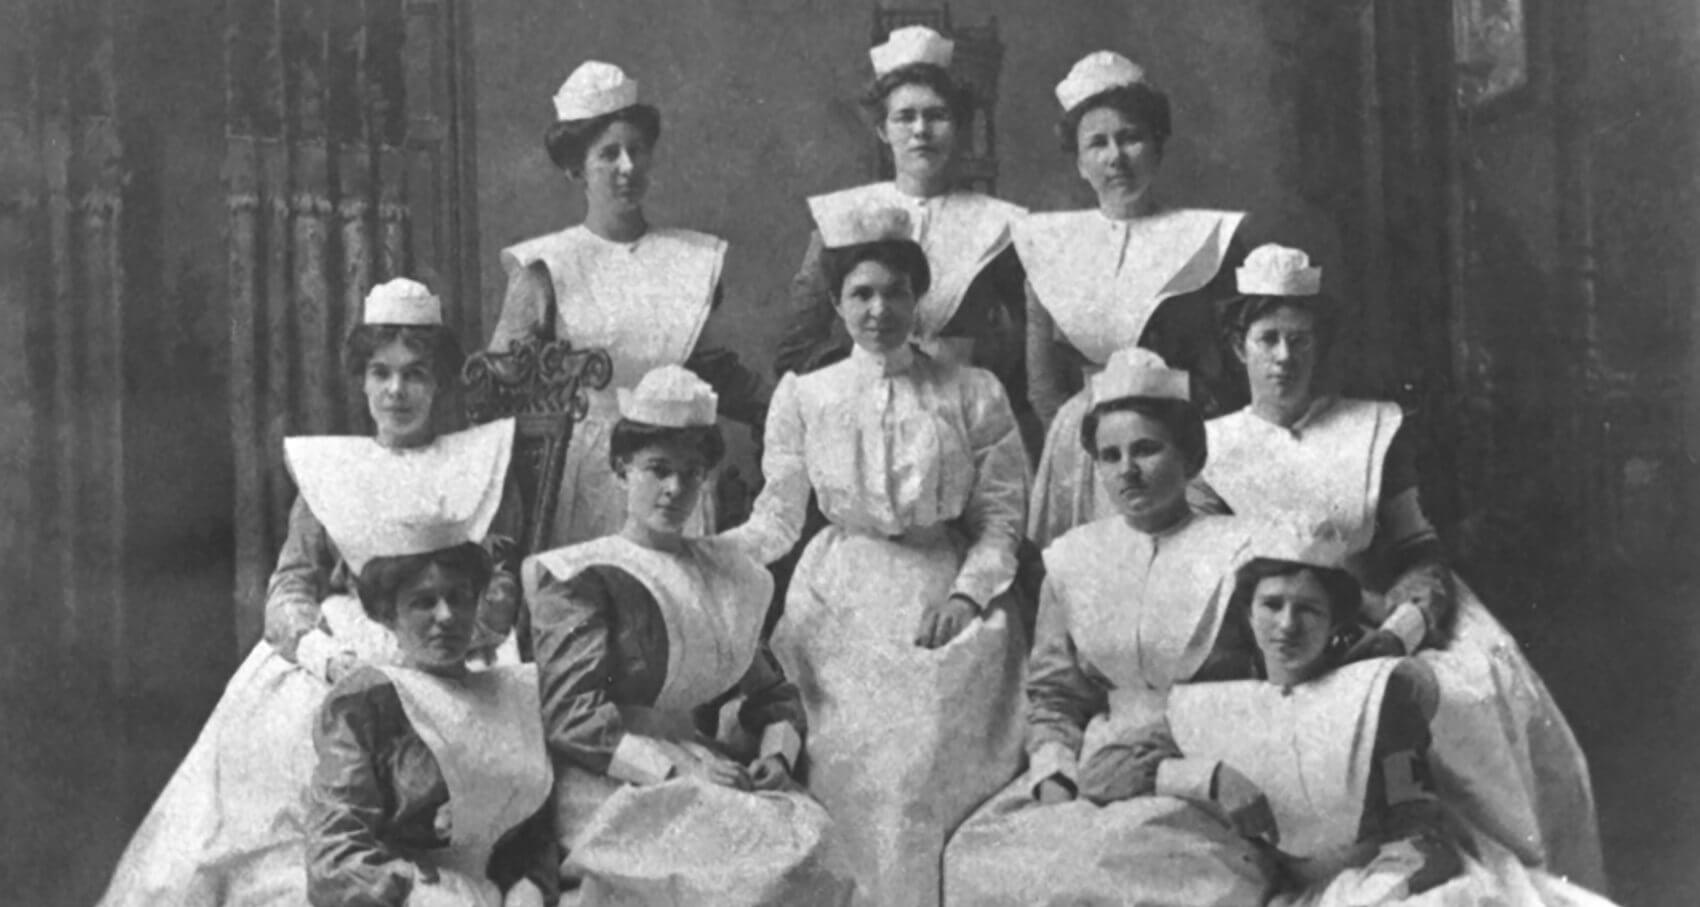 The John Sealy Hospital Training School for Nurses joined UTMB in 1896, becoming the first university-affiliated nursing school in the U.S.